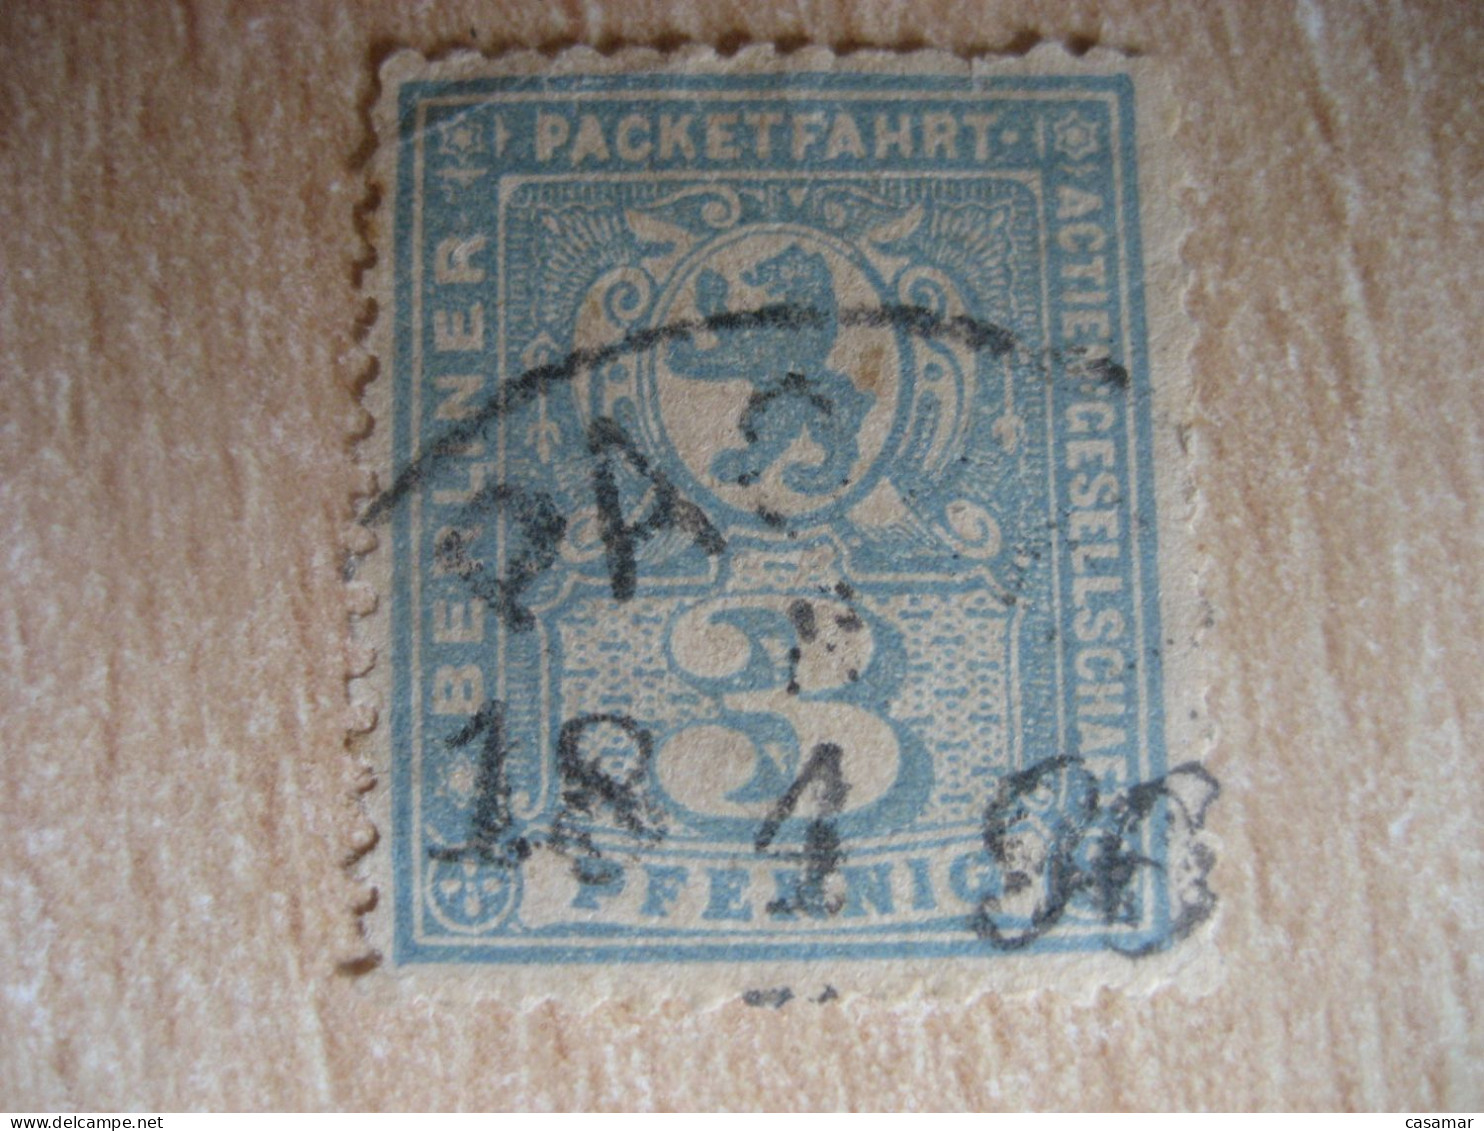 BERLIN Packetfahrt Berliner Actien 3 Pf Privat Private Local Stamp GERMANY Slight Faults - Private & Local Mails